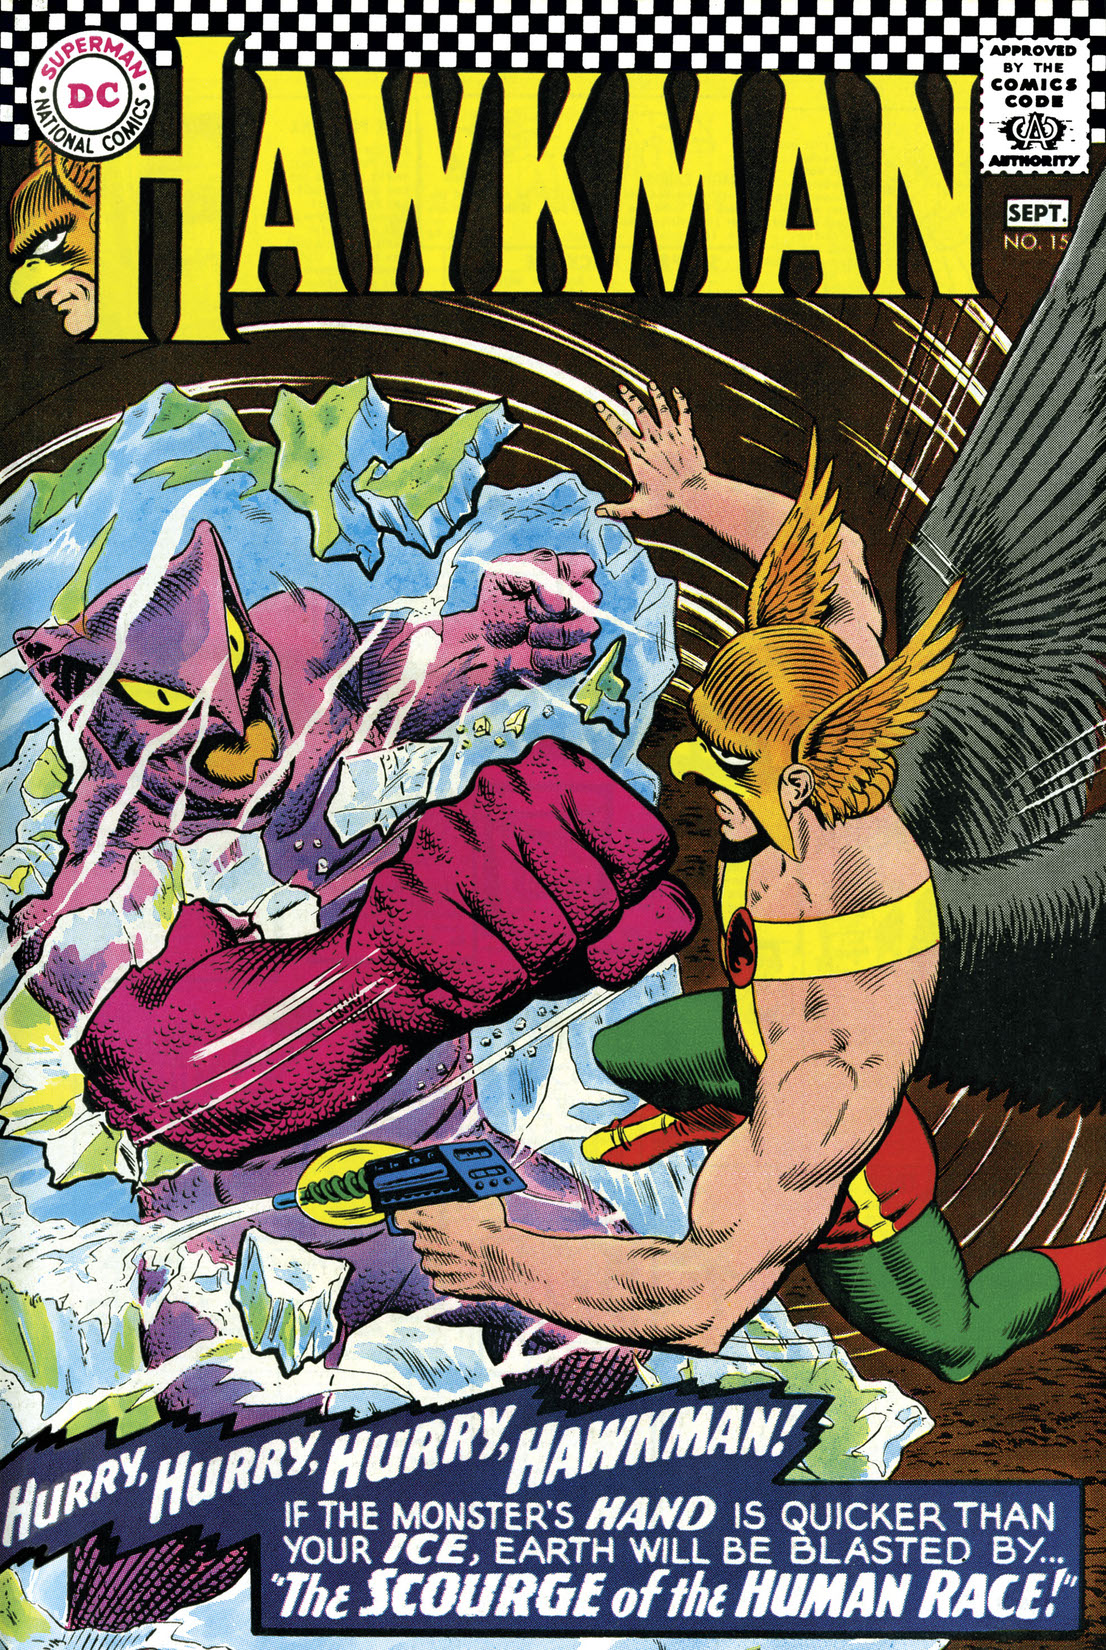 Hawkman (1964-) #15 preview images